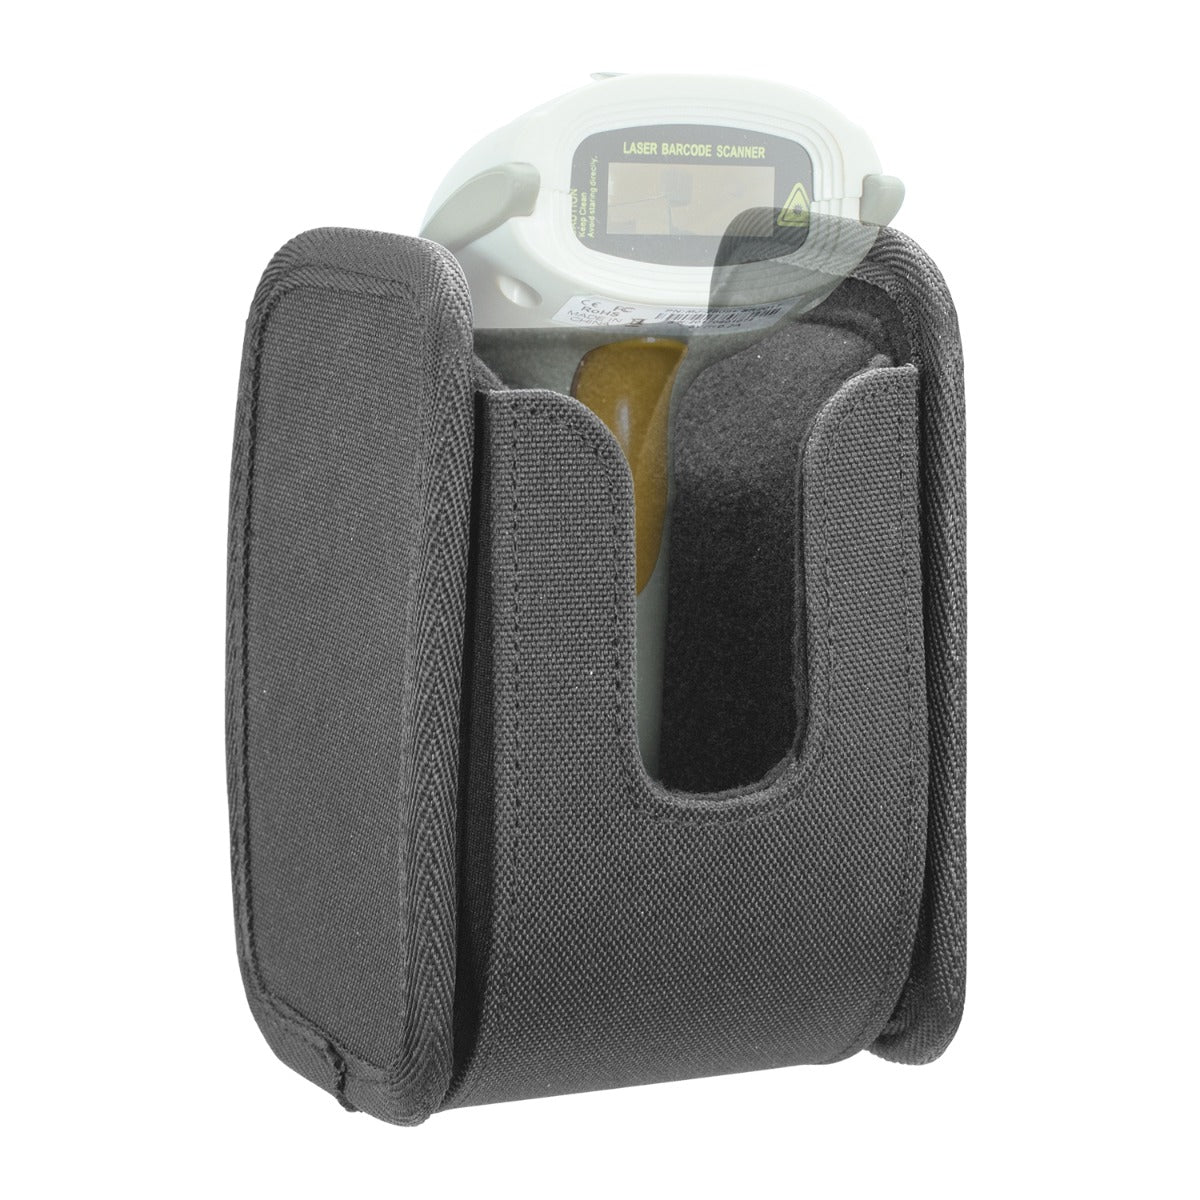 iBOLT Barcode Scanner Holder w/Industry Standard 1 inch / 25 mm Ball Connection